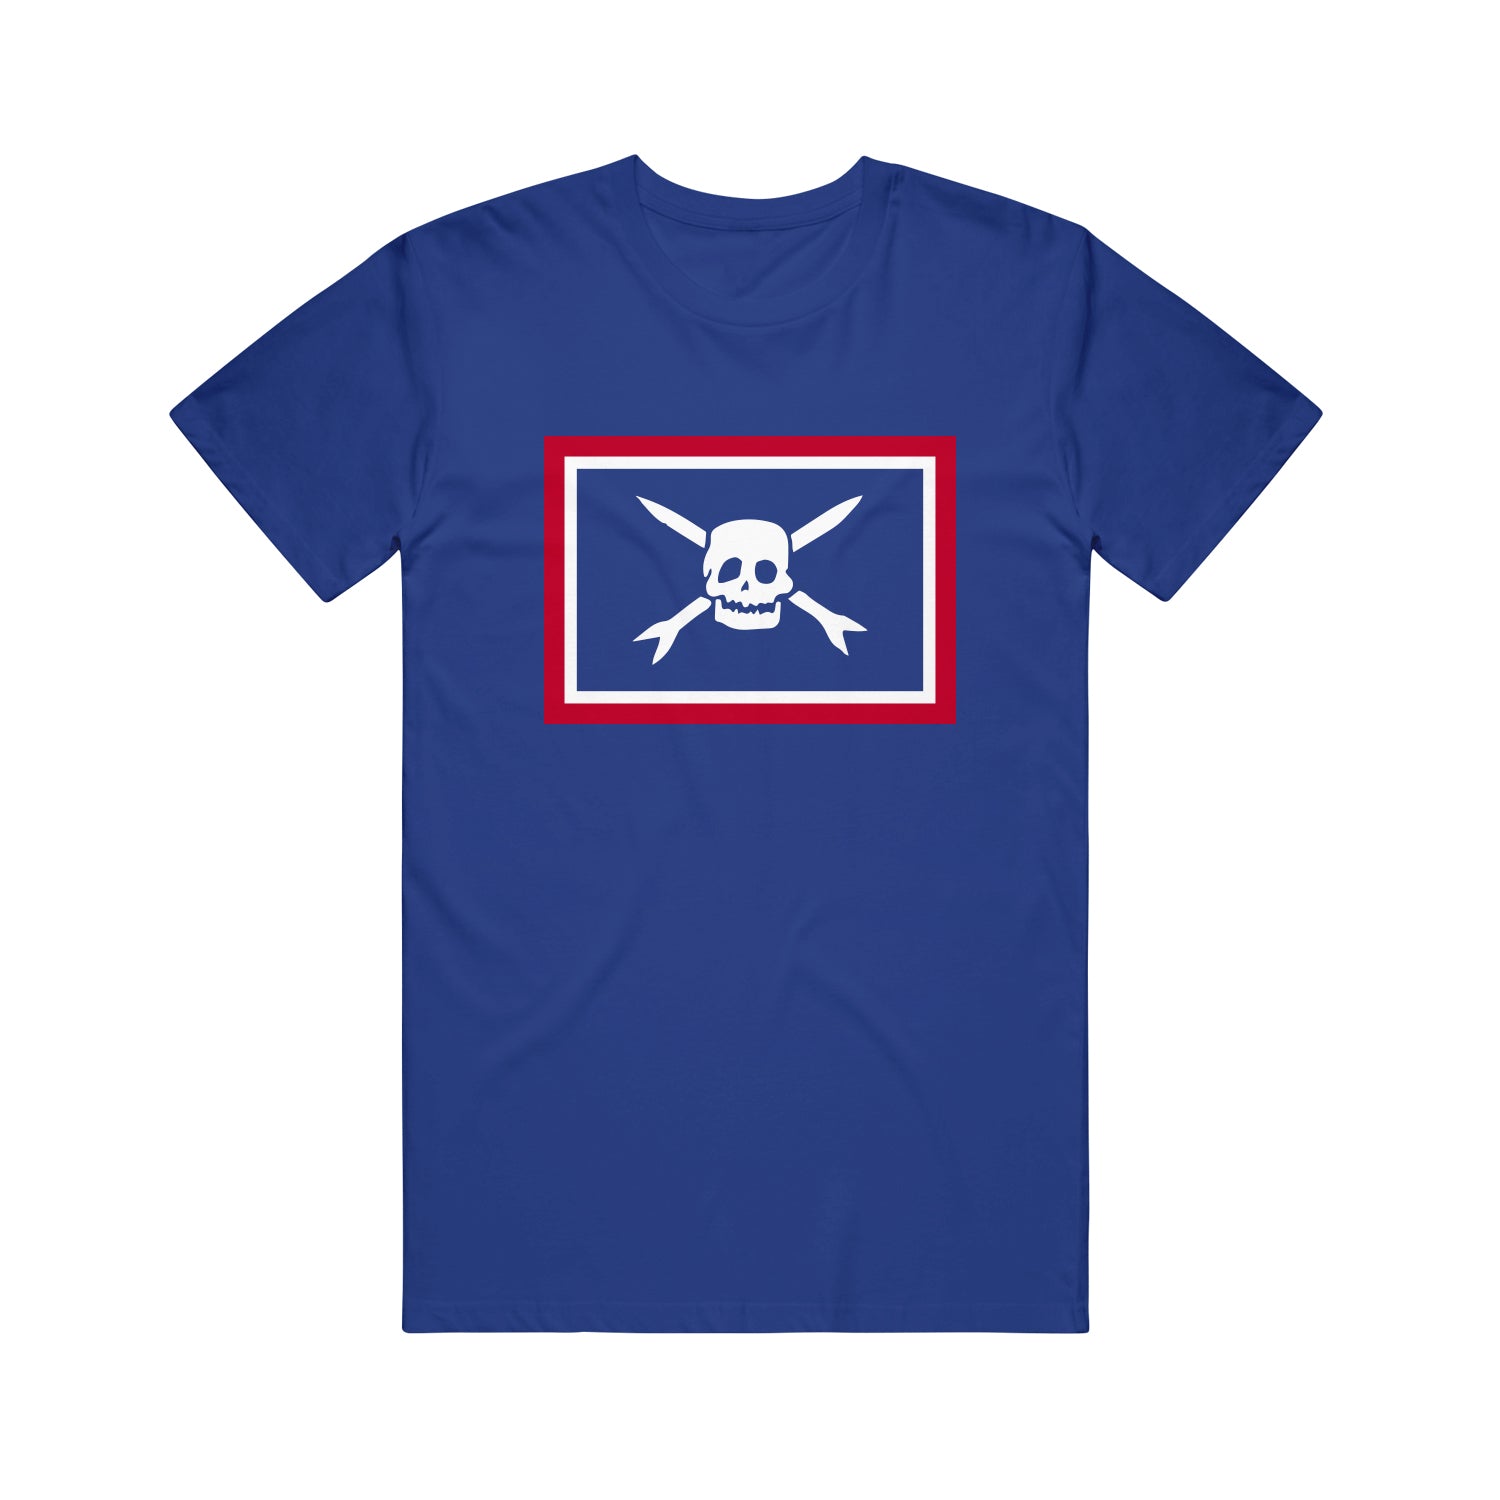 Image of a blue tshirt against a white background. In the center of the tshirt is a horizontal rectangle that has a red outline with a white outline on the inside of it. the rest of the rectangle matches the color of the shirt. Inside the rectangle is the white teenage bottlerocket logo of a skull head with cross arrows.